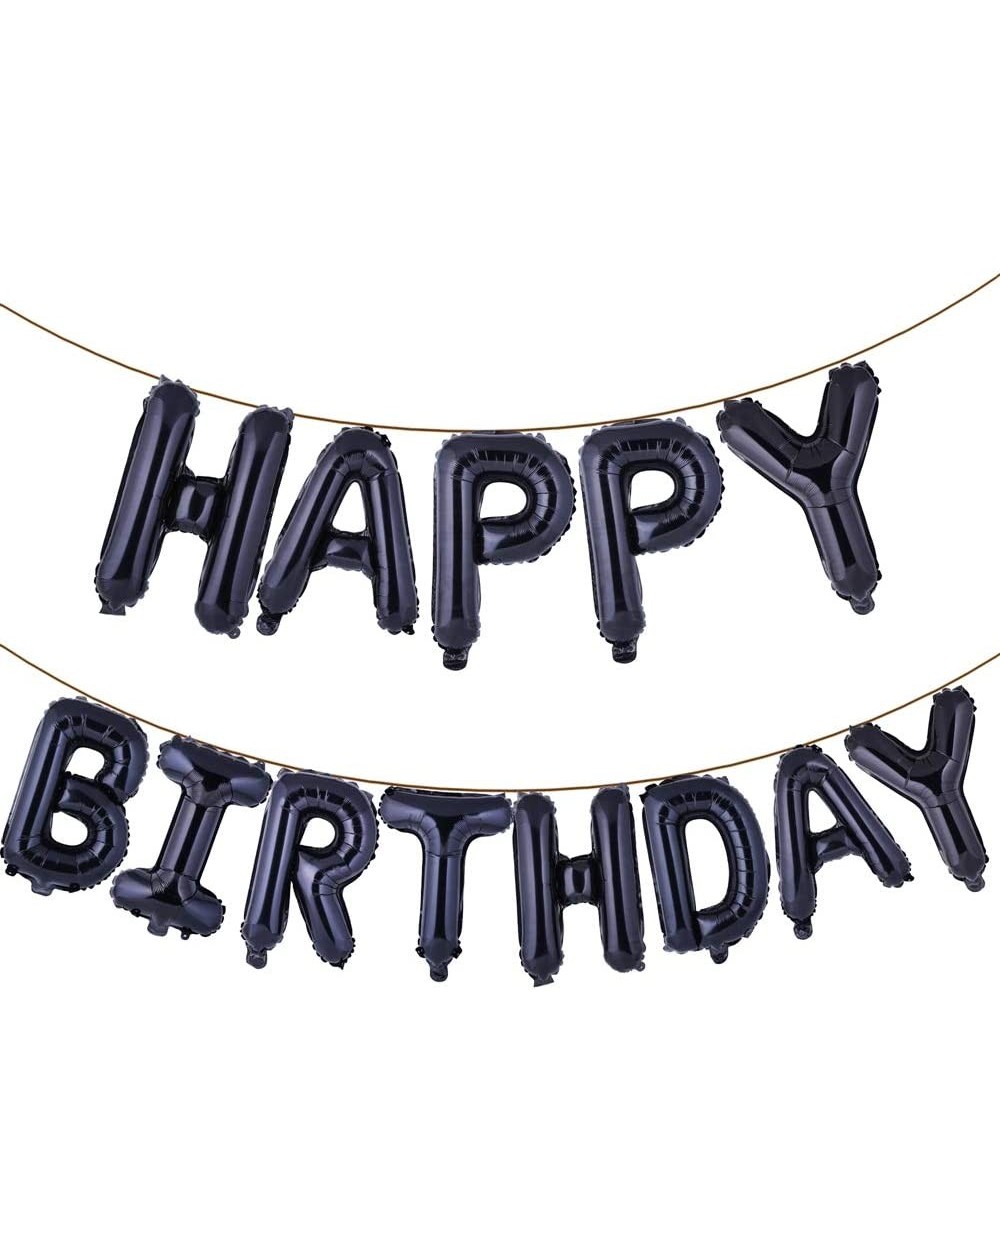 Balloons Happy Birthday Balloons Banner 16 Inch Hanging Birthday Balloons 3D Silver Foil Letter Balloons for Kids and Adults ...